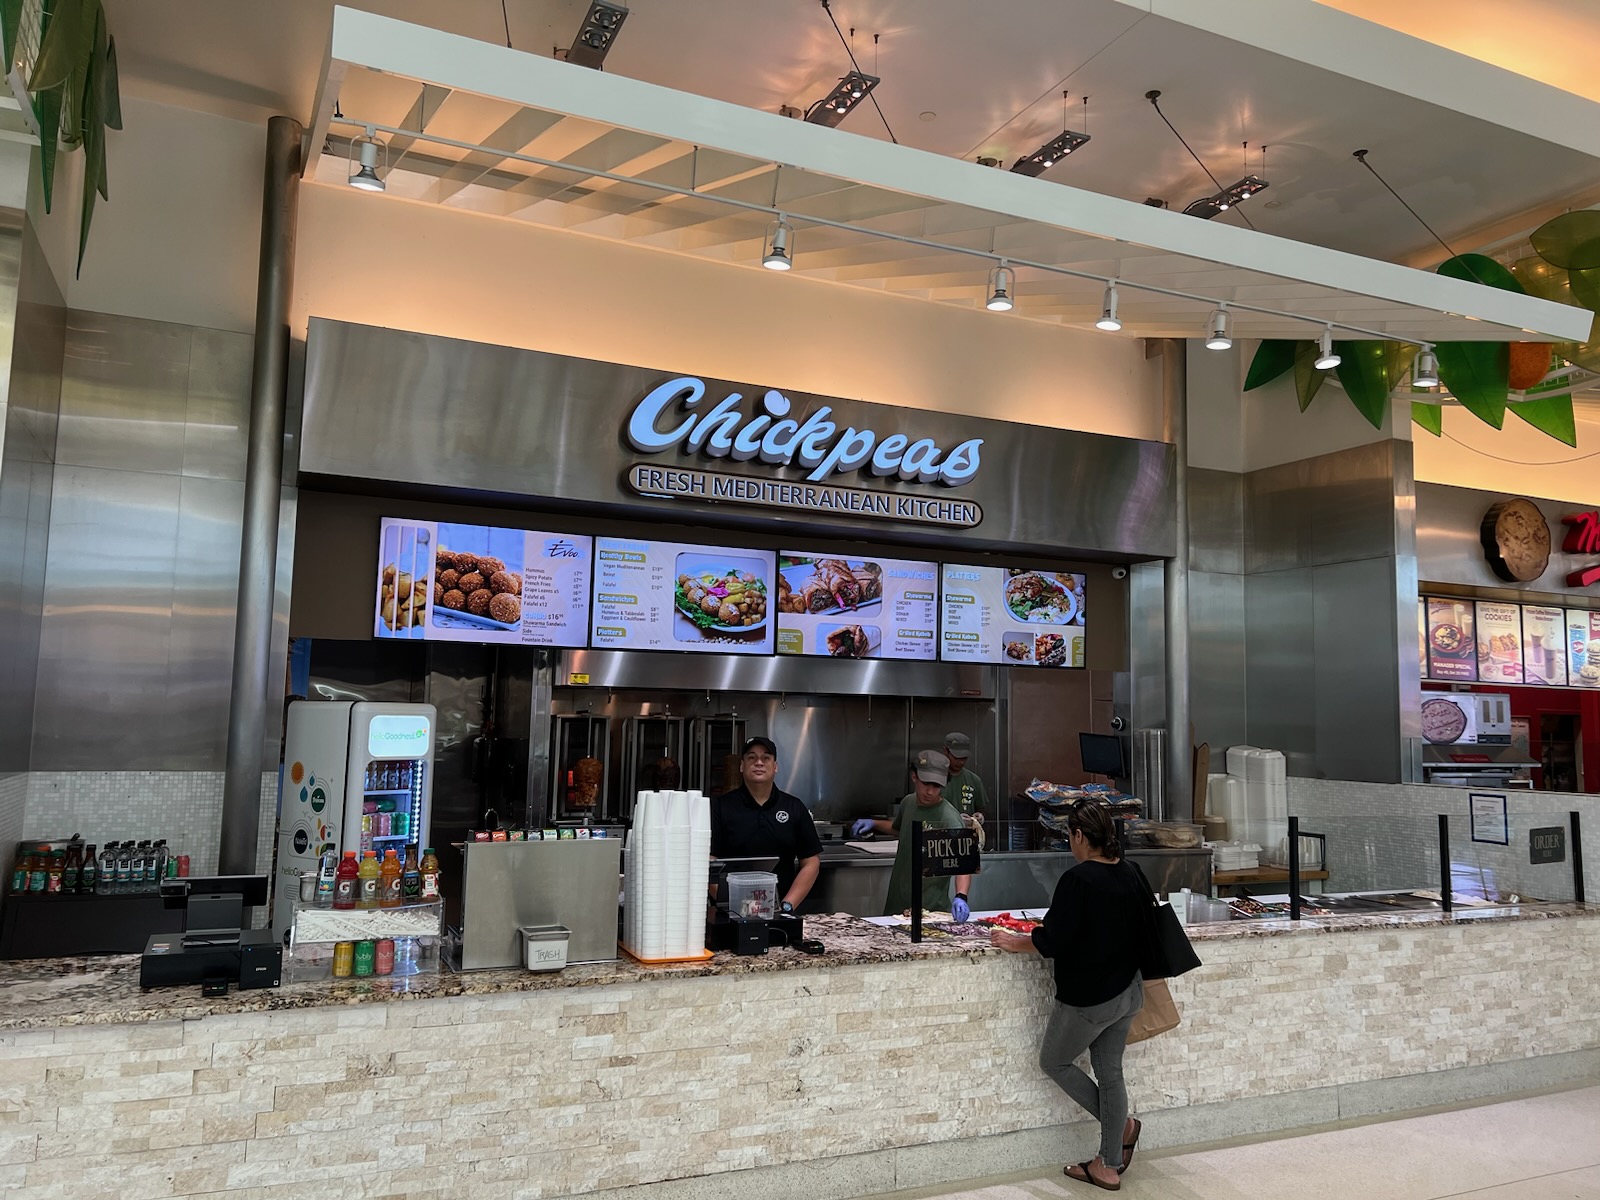 Evoo (formerly Chickpeas) | Healthy Lebanese Mediterranean Food at the Mall at Millenia